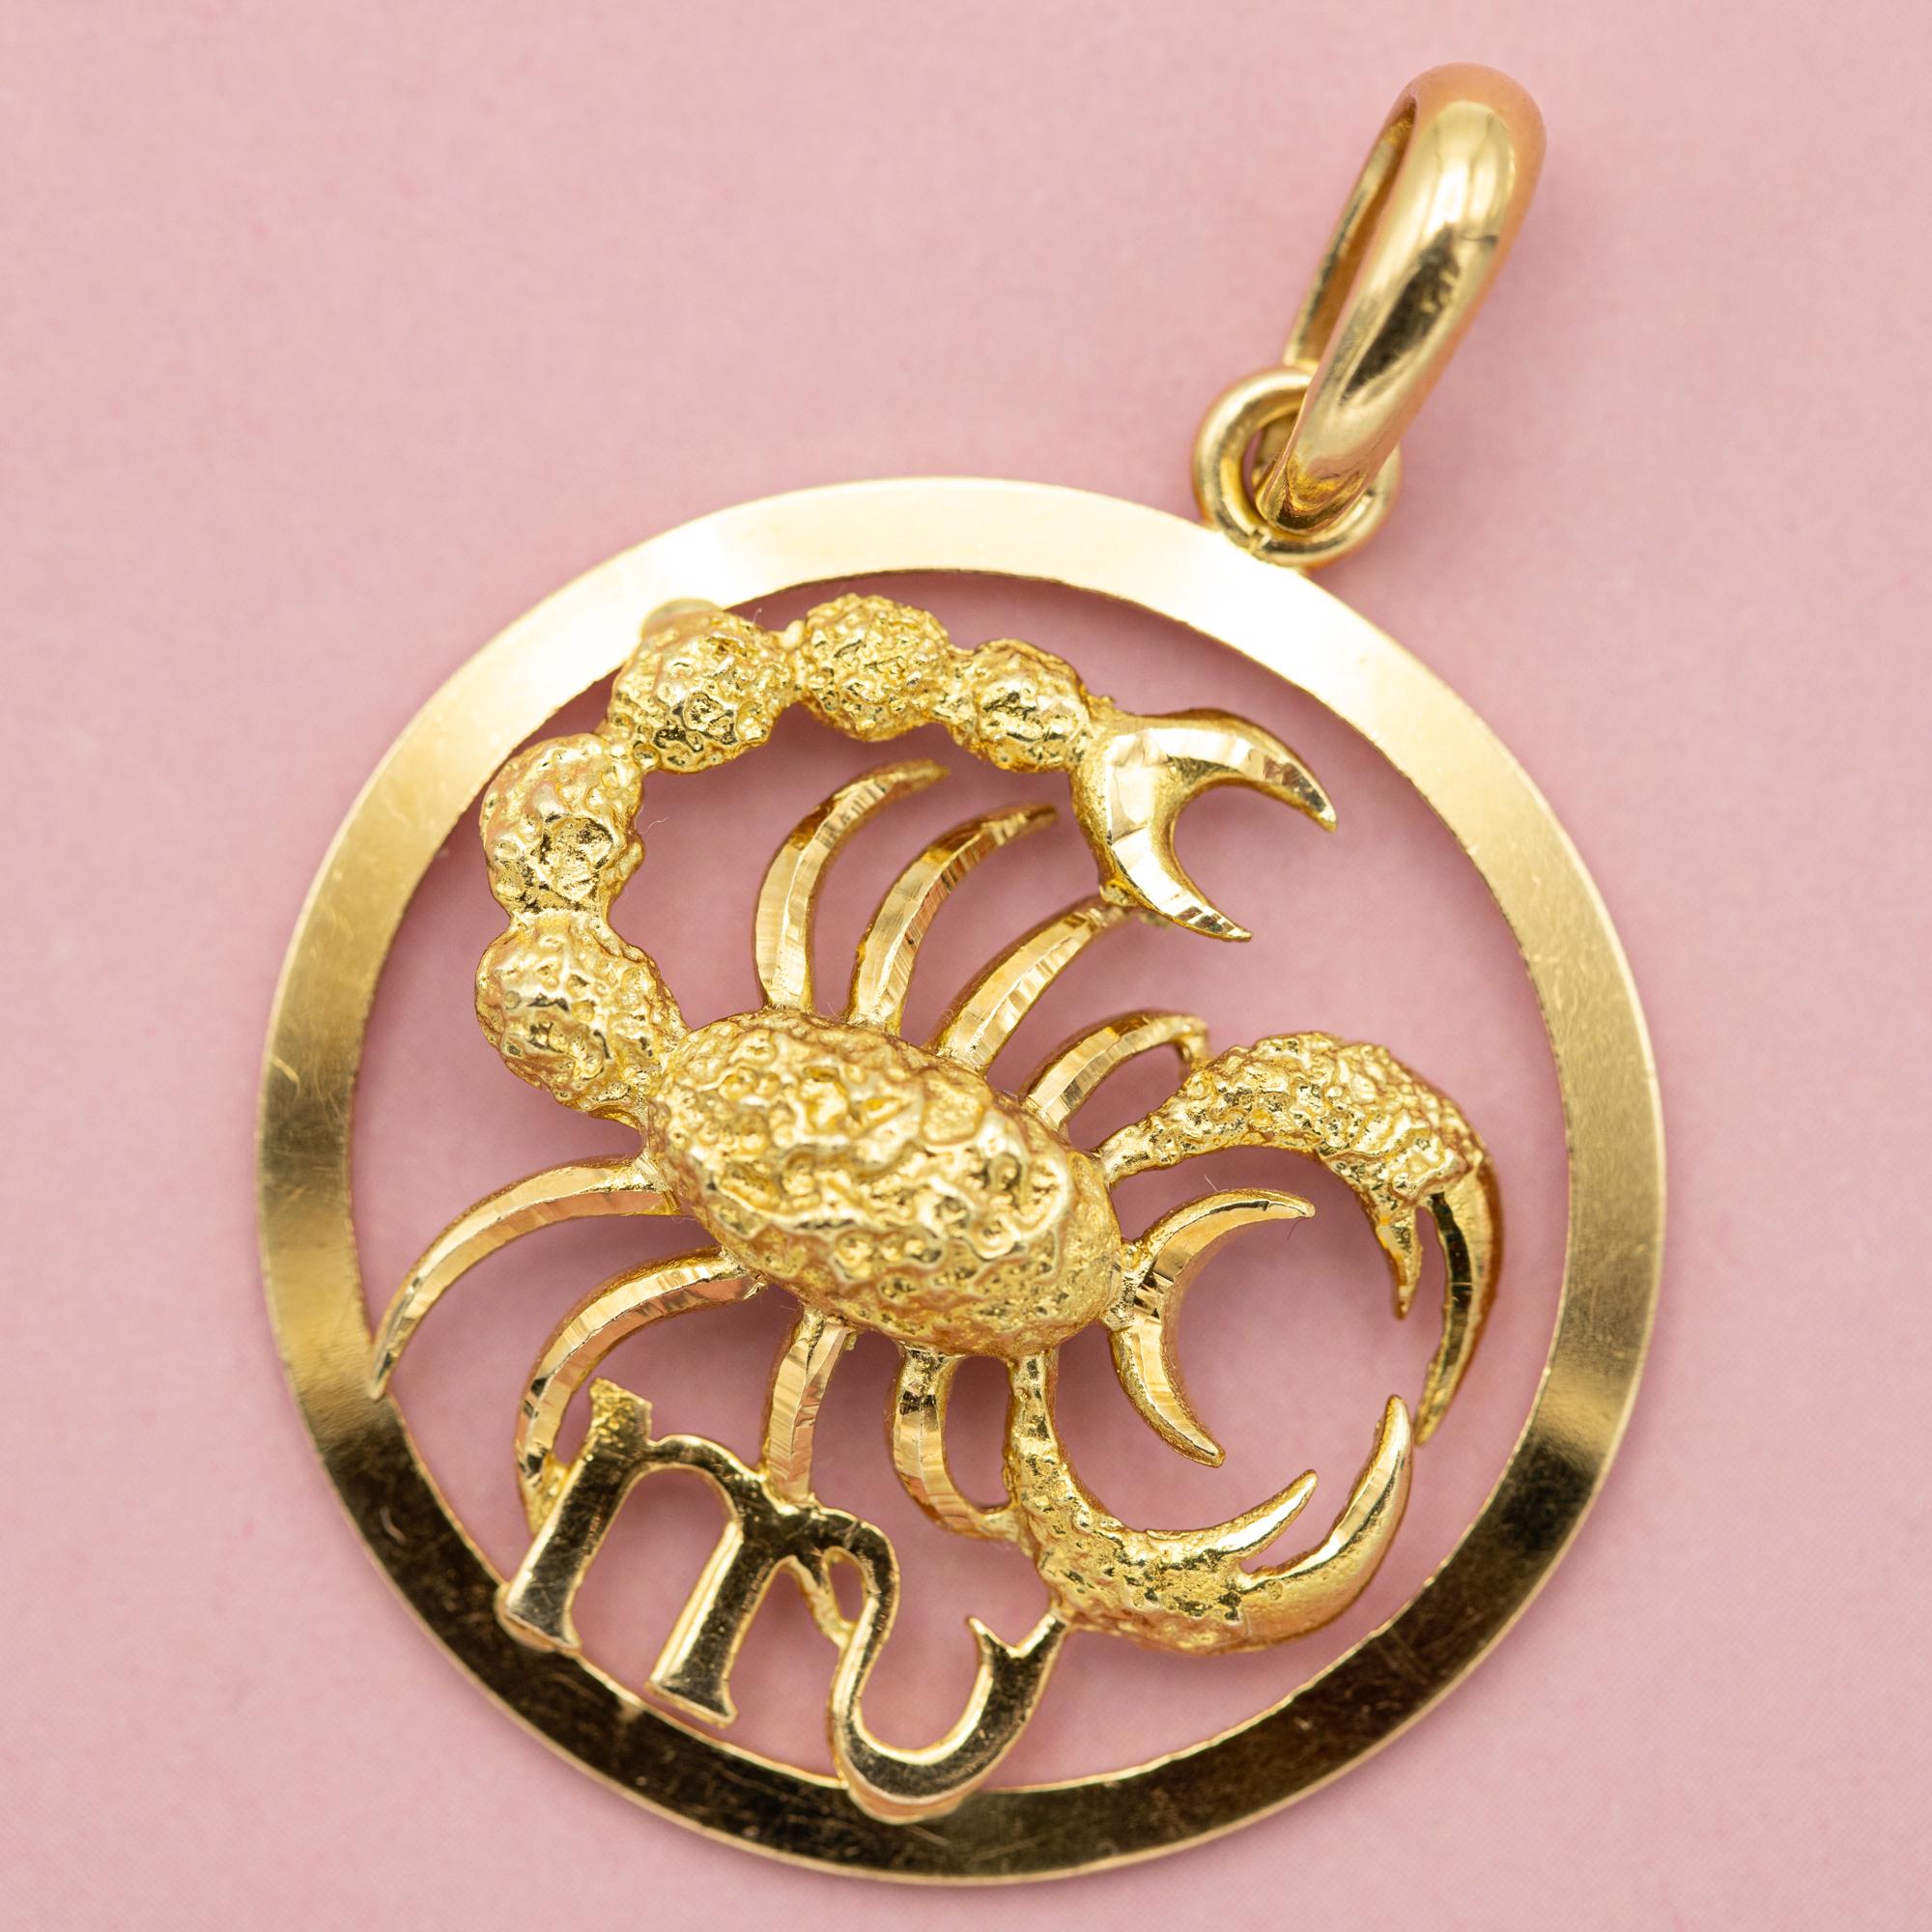 XL Large 18k zodiac charm pendant - Scorpio medallion - solid yellow gold In Good Condition For Sale In Antwerp, BE